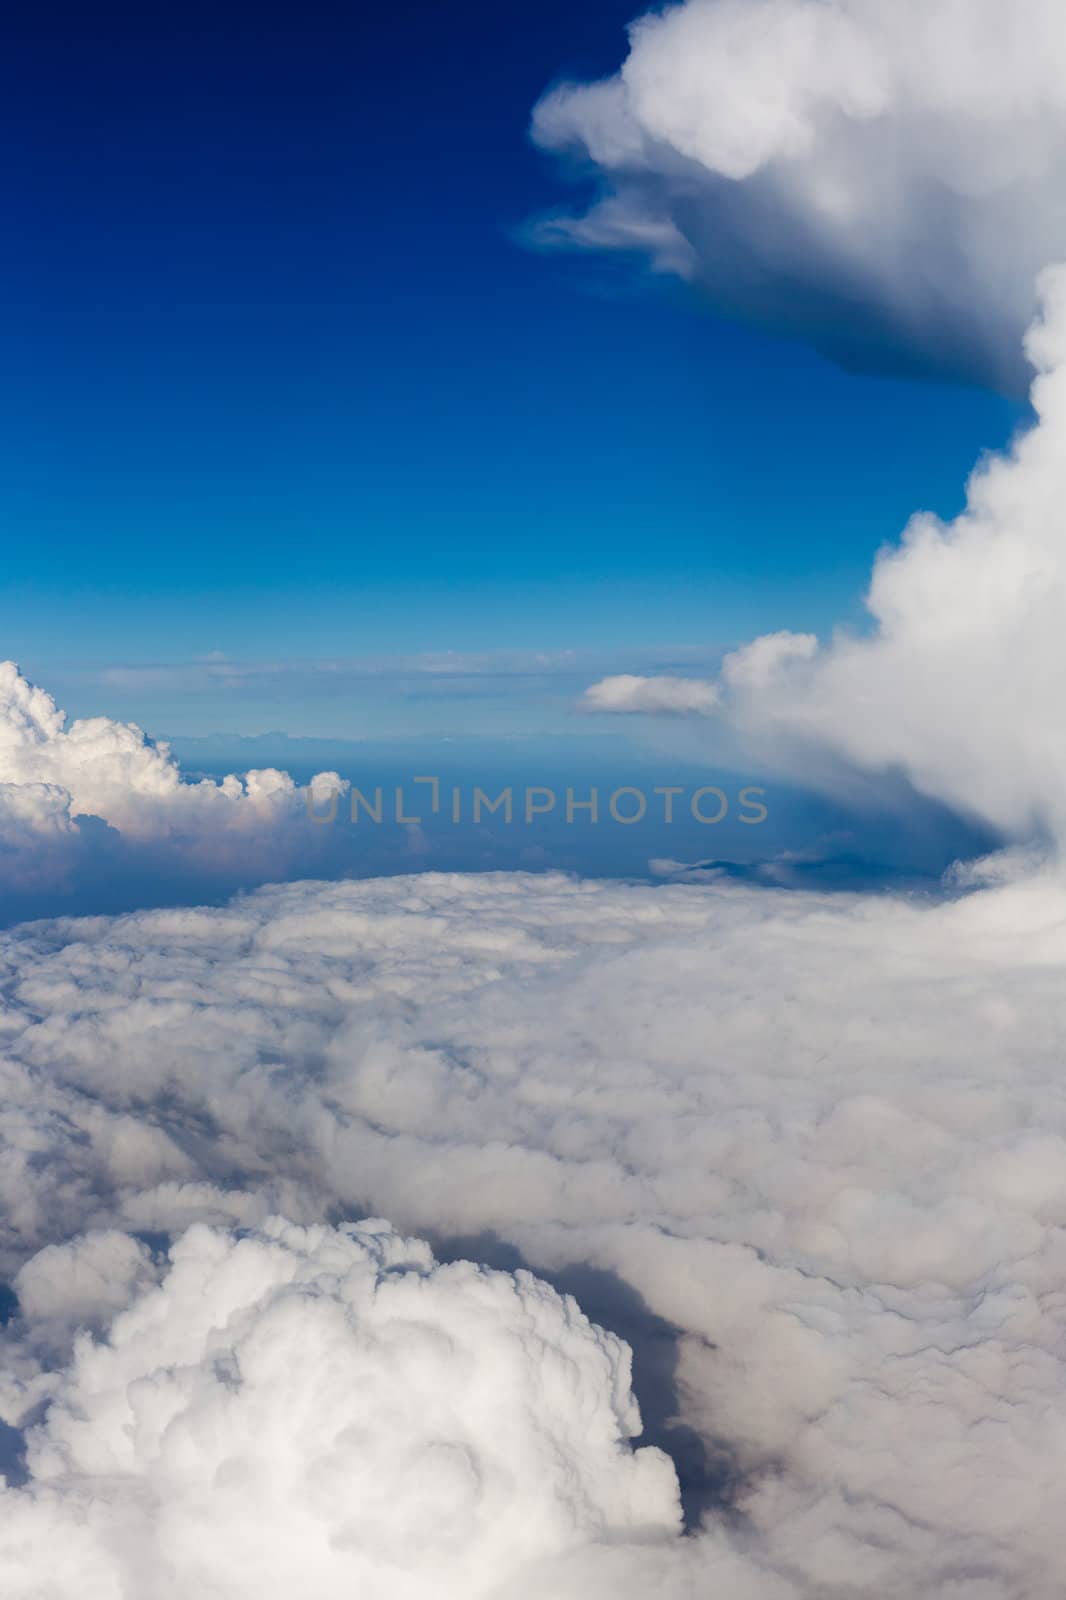 Cloudscape seen from above the clouds.